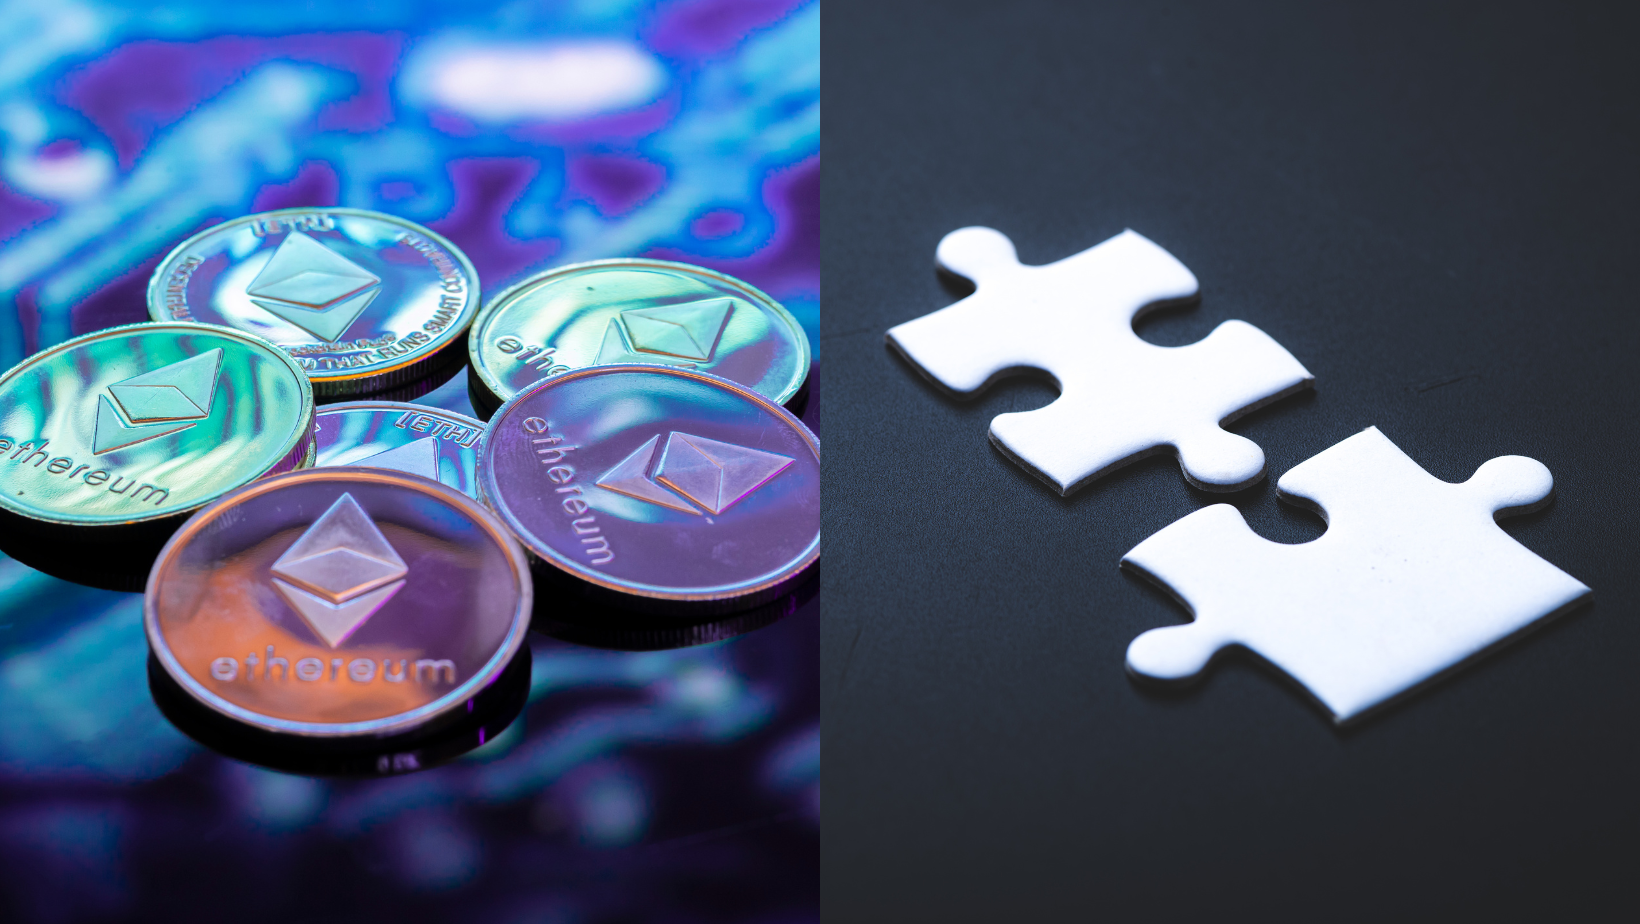 gold, silver, and copper Ethereum coins in defocused printed circuit background (left), two pieces of jigsaw puzzle (right)